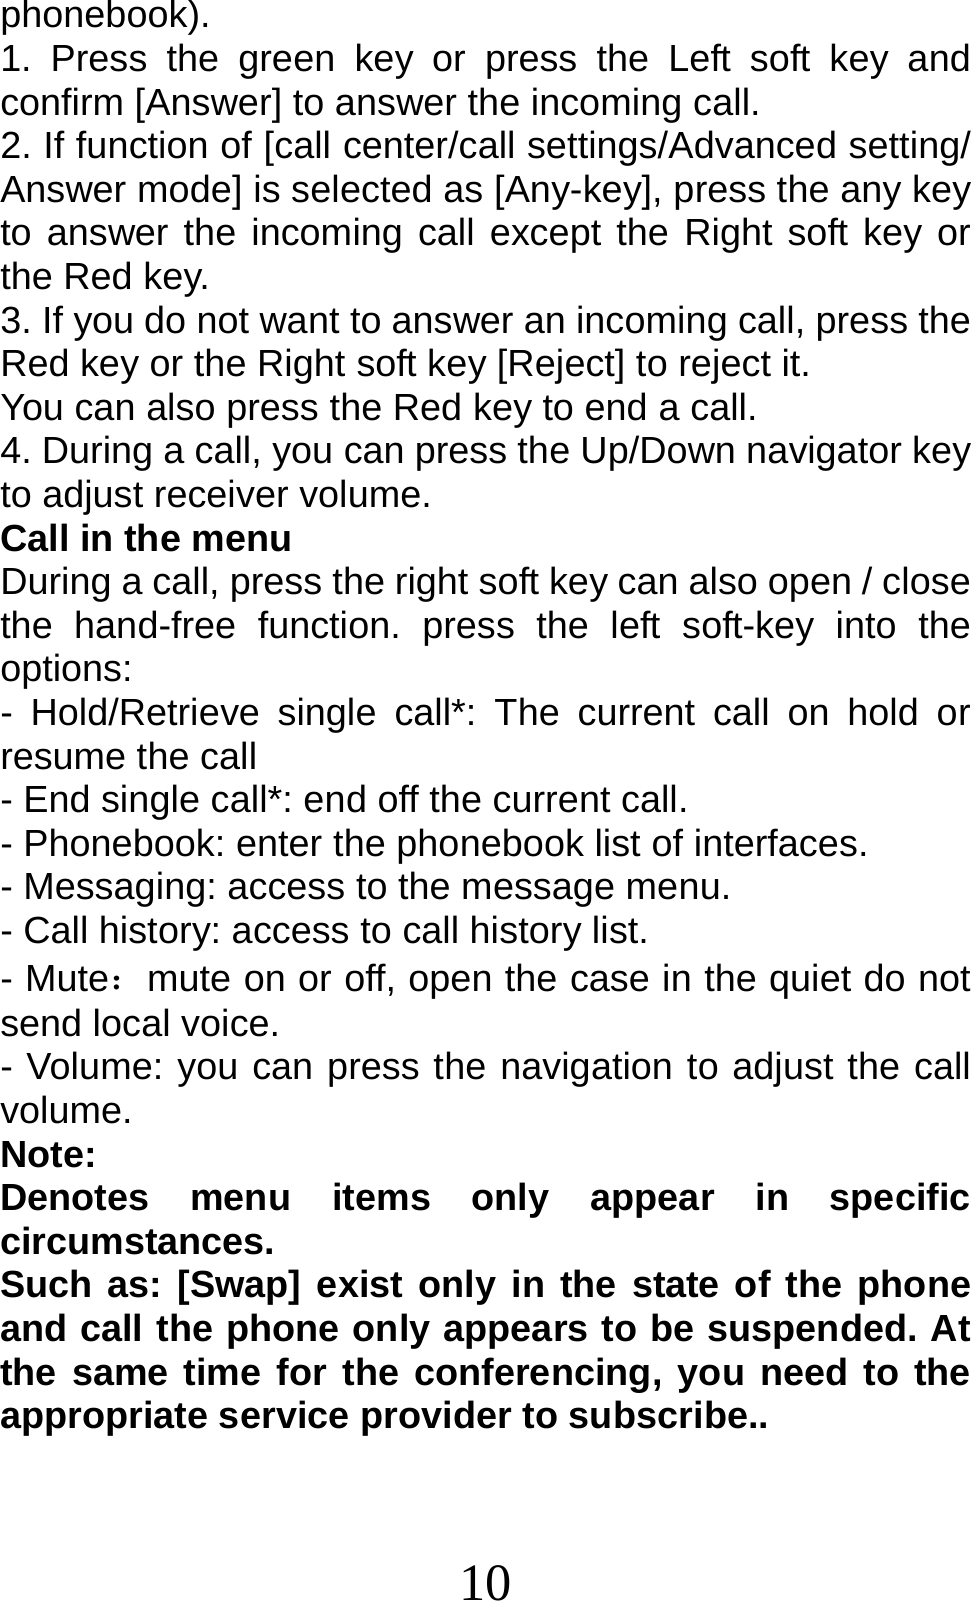 10 phonebook). 1. Press the green key or press the Left soft key and confirm [Answer] to answer the incoming call. 2. If function of [call center/call settings/Advanced setting/ Answer mode] is selected as [Any-key], press the any key to answer the incoming call except the Right soft key or the Red key. 3. If you do not want to answer an incoming call, press the Red key or the Right soft key [Reject] to reject it. You can also press the Red key to end a call.   4. During a call, you can press the Up/Down navigator key to adjust receiver volume. Call in the menu During a call, press the right soft key can also open / close the hand-free function. press the left soft-key into the options: - Hold/Retrieve single call*: The current call on hold or resume the call - End single call*: end off the current call.   - Phonebook: enter the phonebook list of interfaces. - Messaging: access to the message menu. - Call history: access to call history list. - Mute：mute on or off, open the case in the quiet do not send local voice. - Volume: you can press the navigation to adjust the call volume. Note:  Denotes menu items only appear in specific circumstances.  Such as: [Swap] exist only in the state of the phone and call the phone only appears to be suspended. At the same time for the conferencing, you need to the appropriate service provider to subscribe.. 